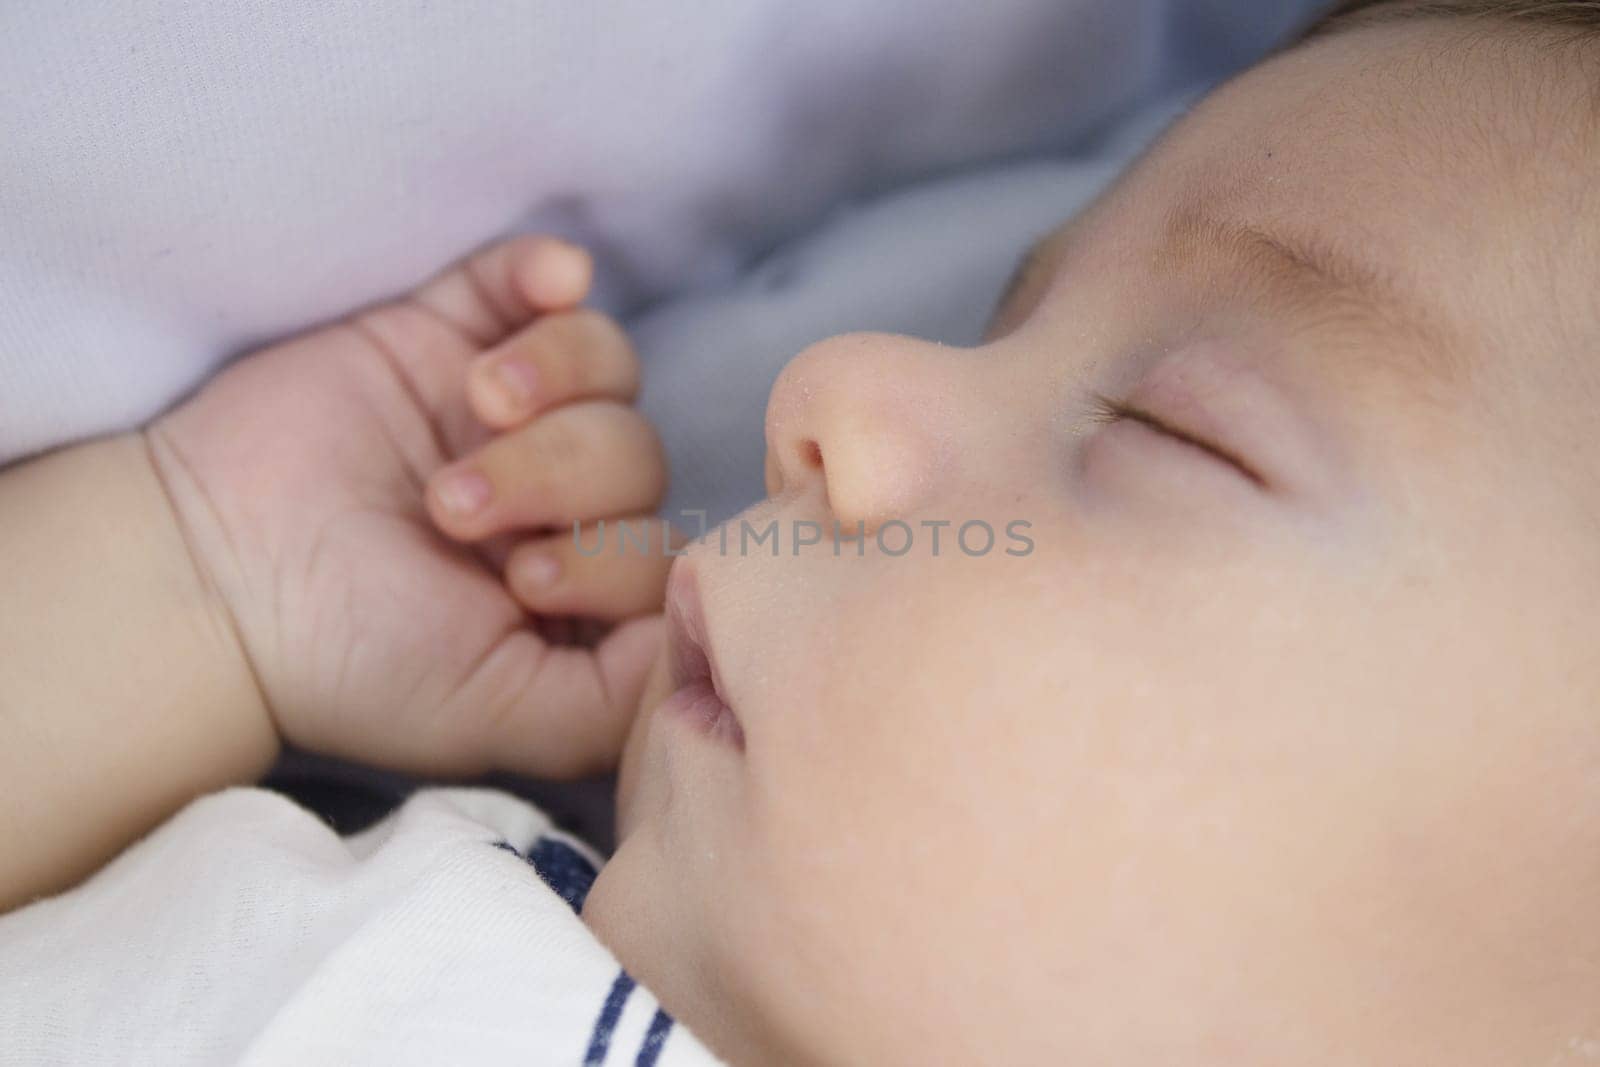 Two month old baby sleeping with hand next to face. Relax scene